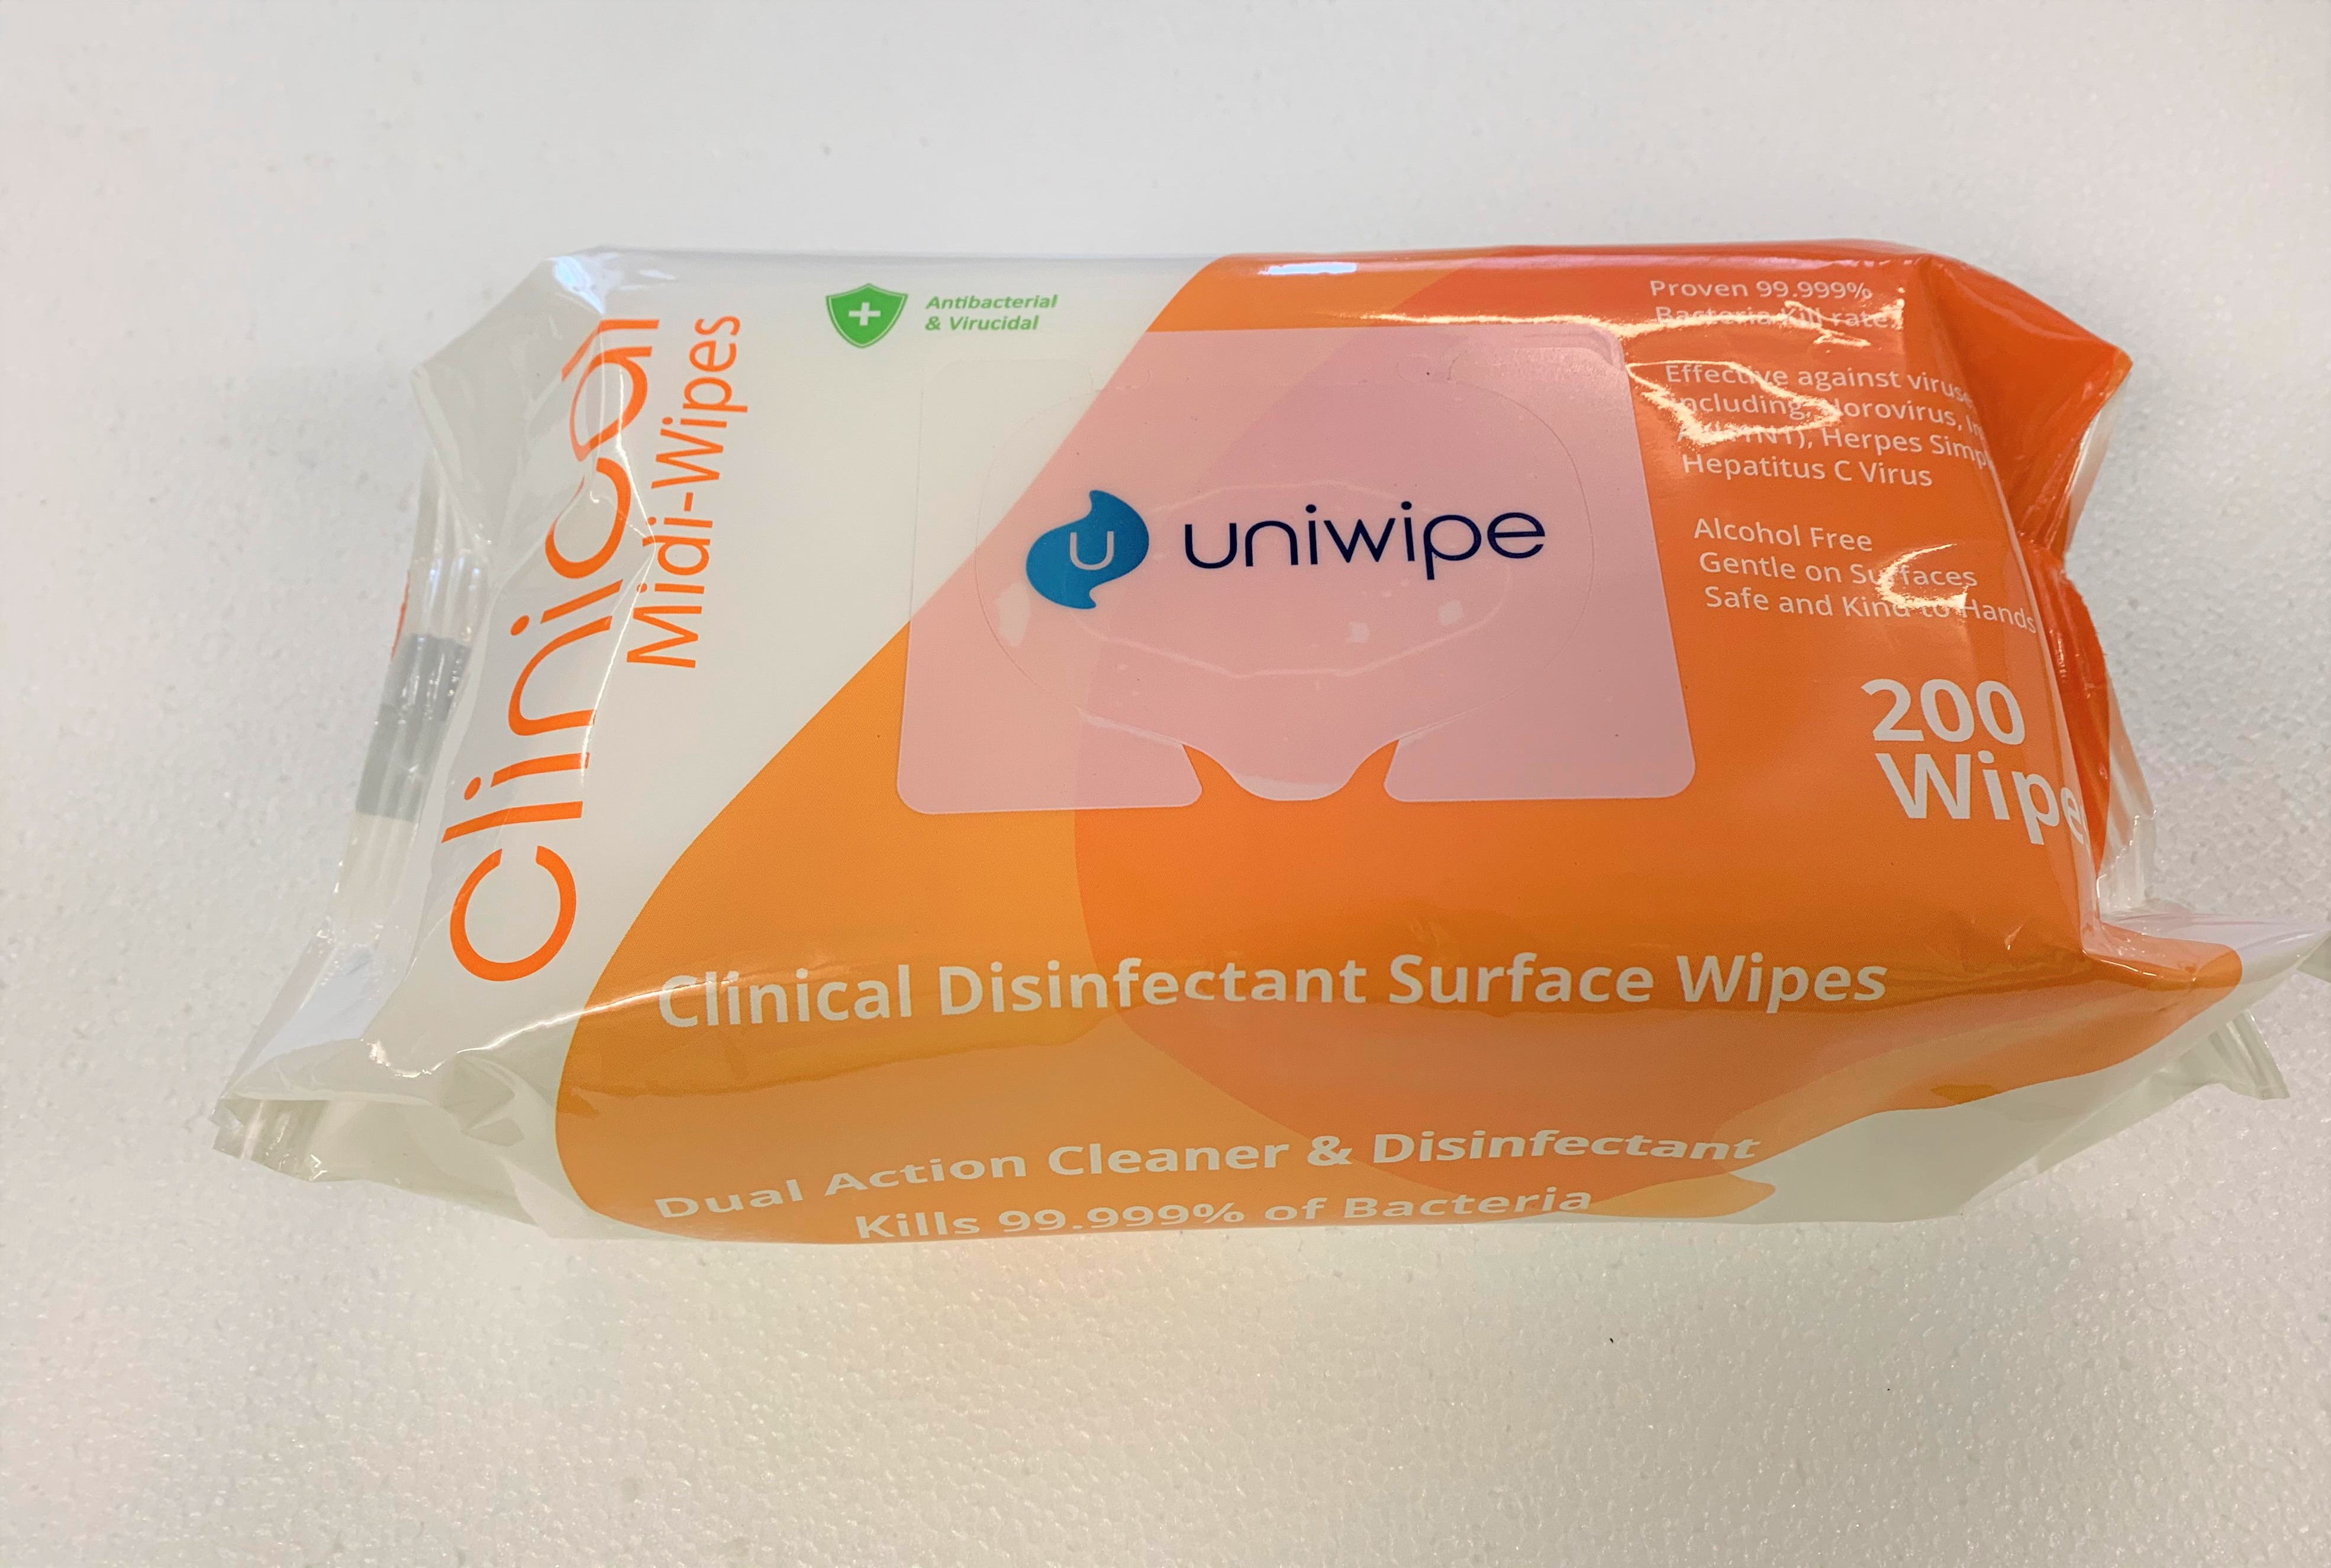 Uniwipe+Clinical+Disinfectant+Surface+Wipes+20cm+x+20cm+pack+of+200